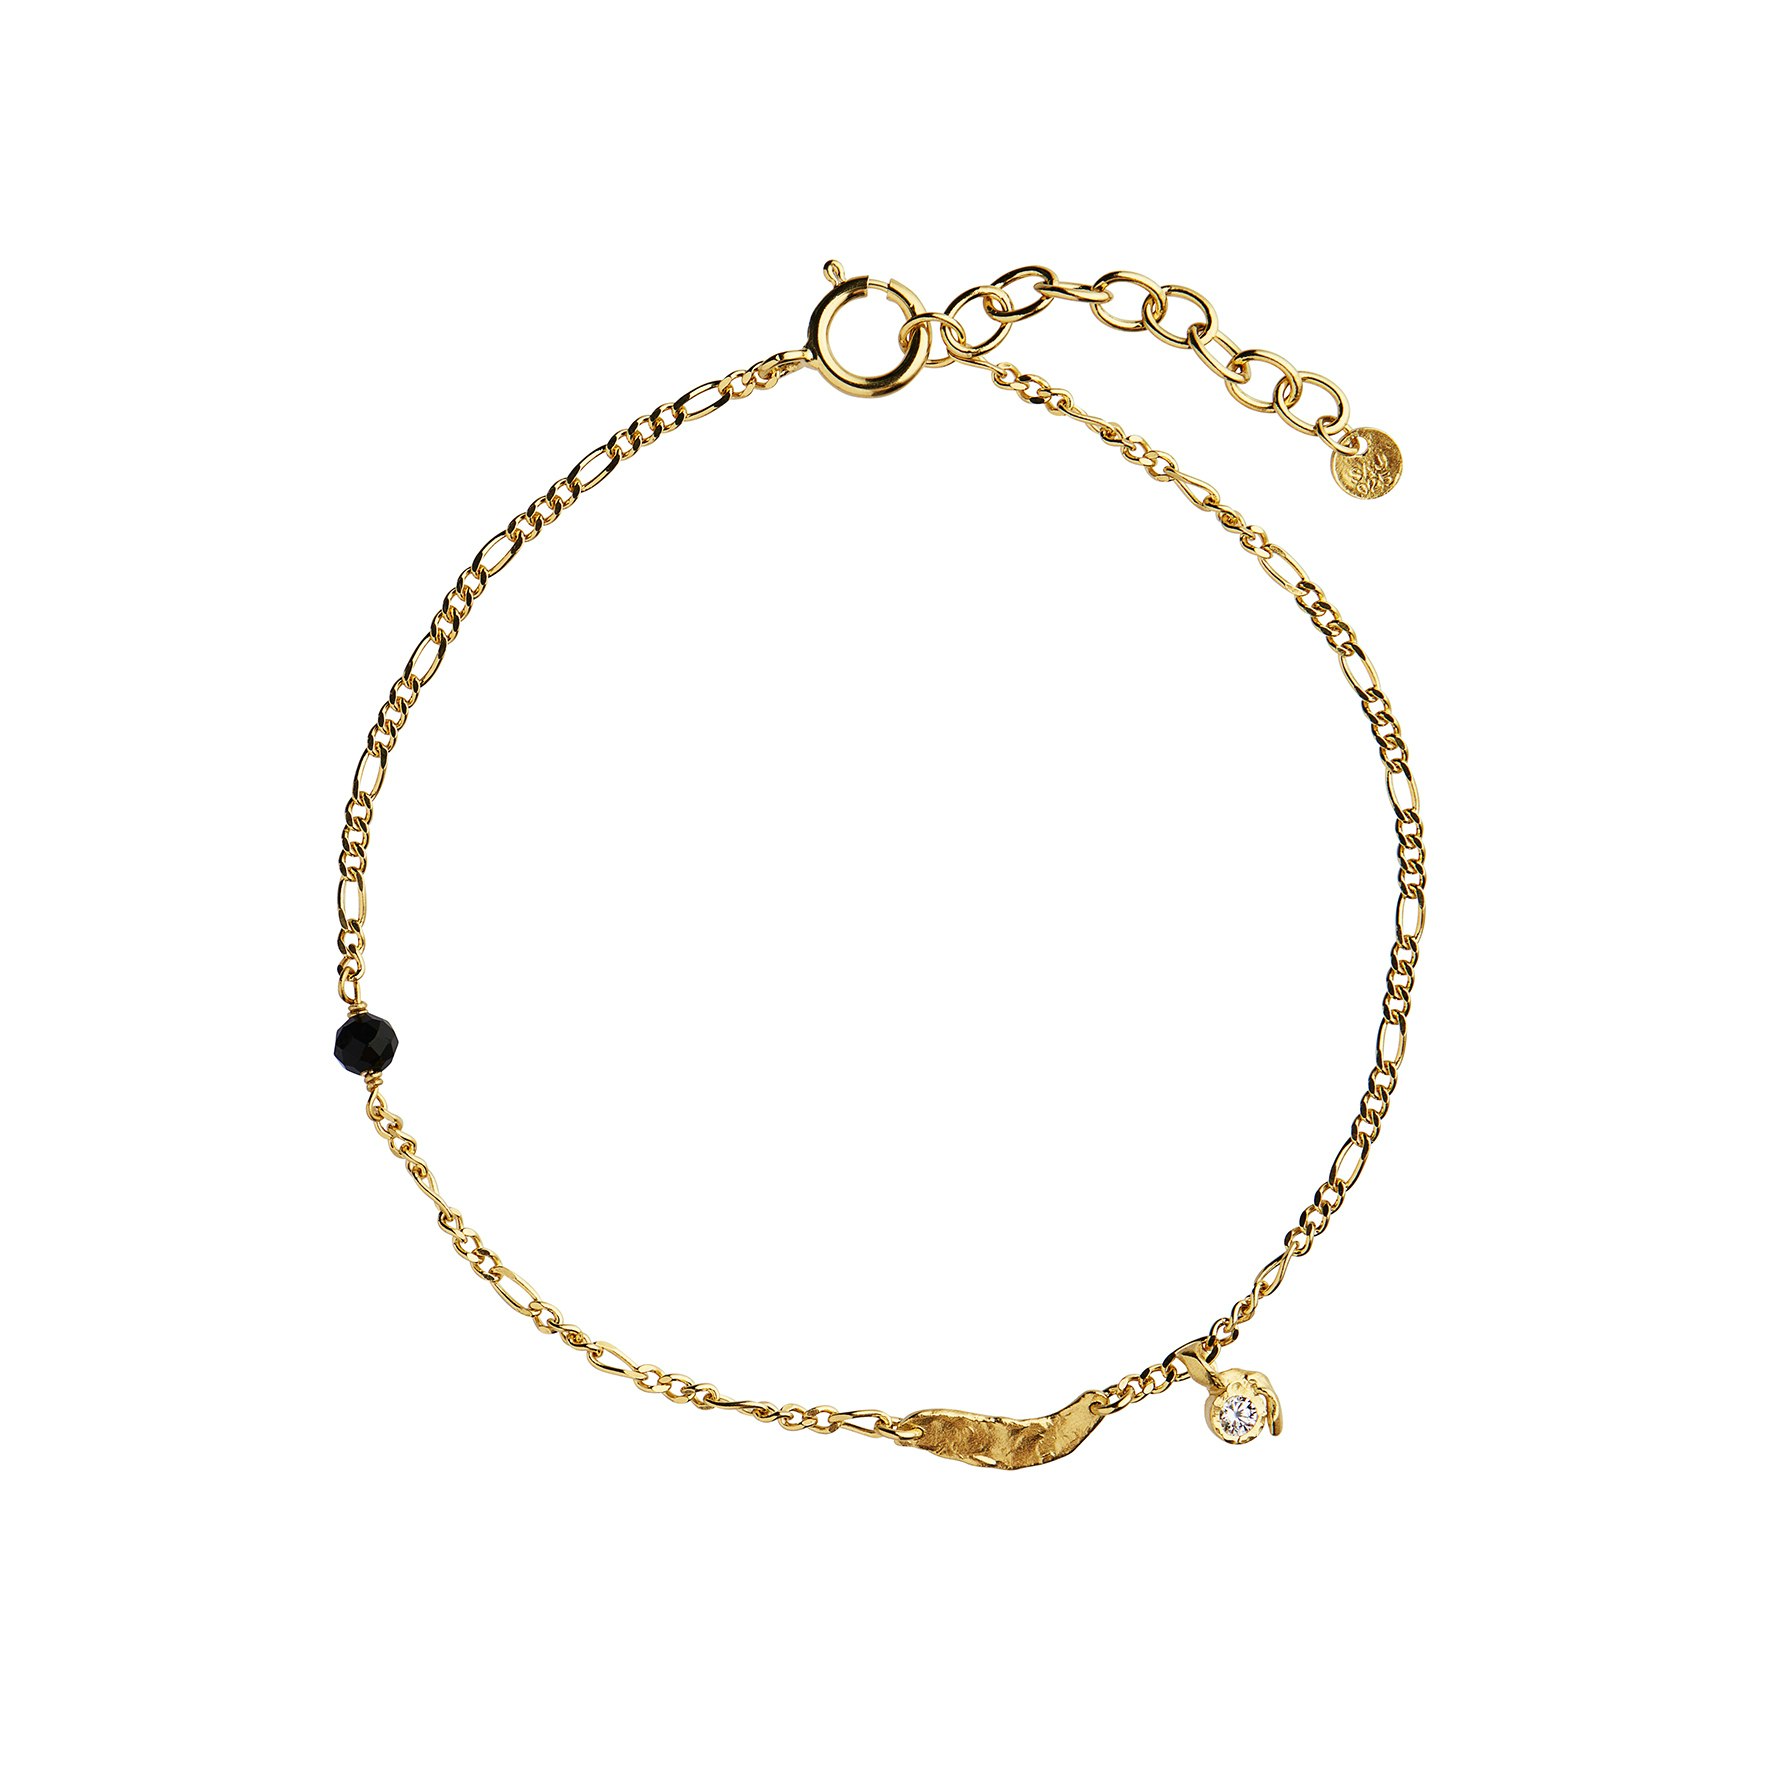 Flow Splash Bracelet With Stones from STINE A Jewelry in Goldplated-Silver Sterling 925